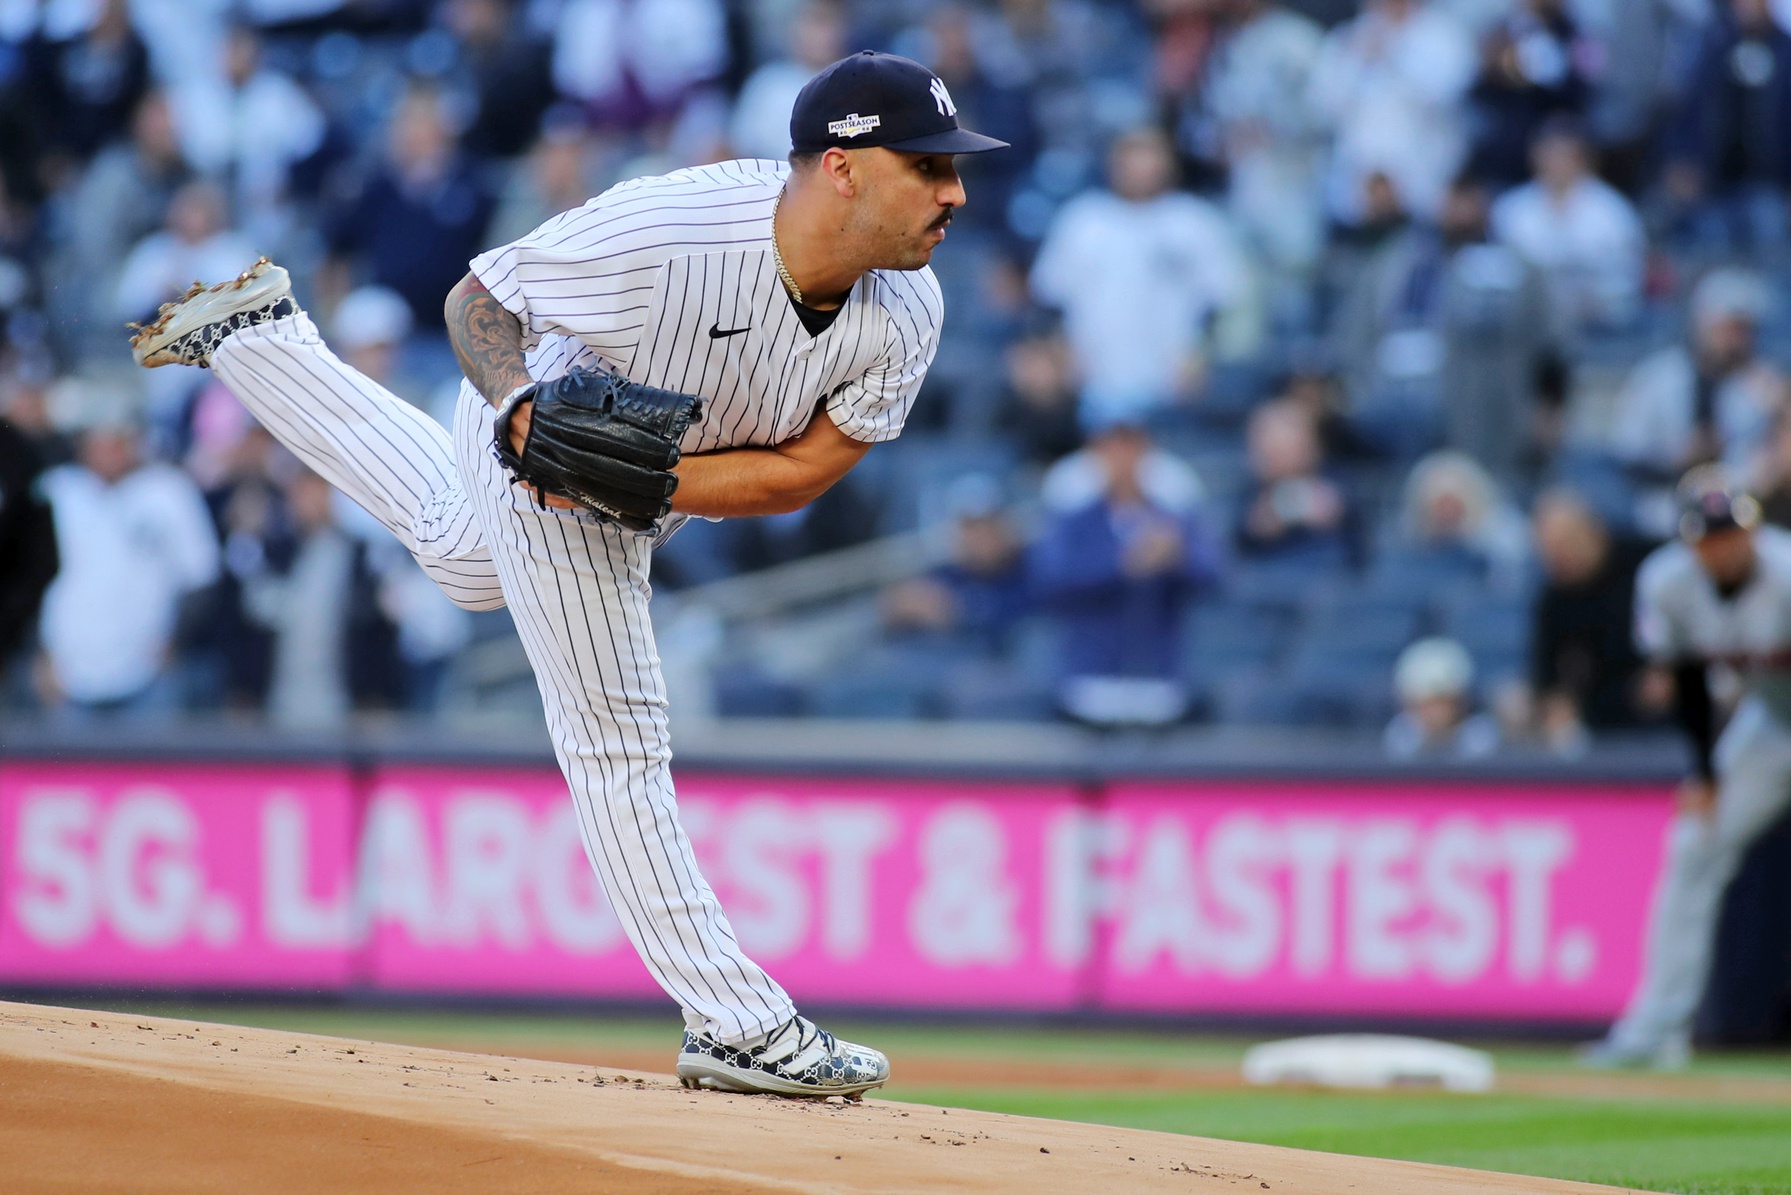 Yankees-Guardians ALDS Game 5: Live scores, updates, analysis